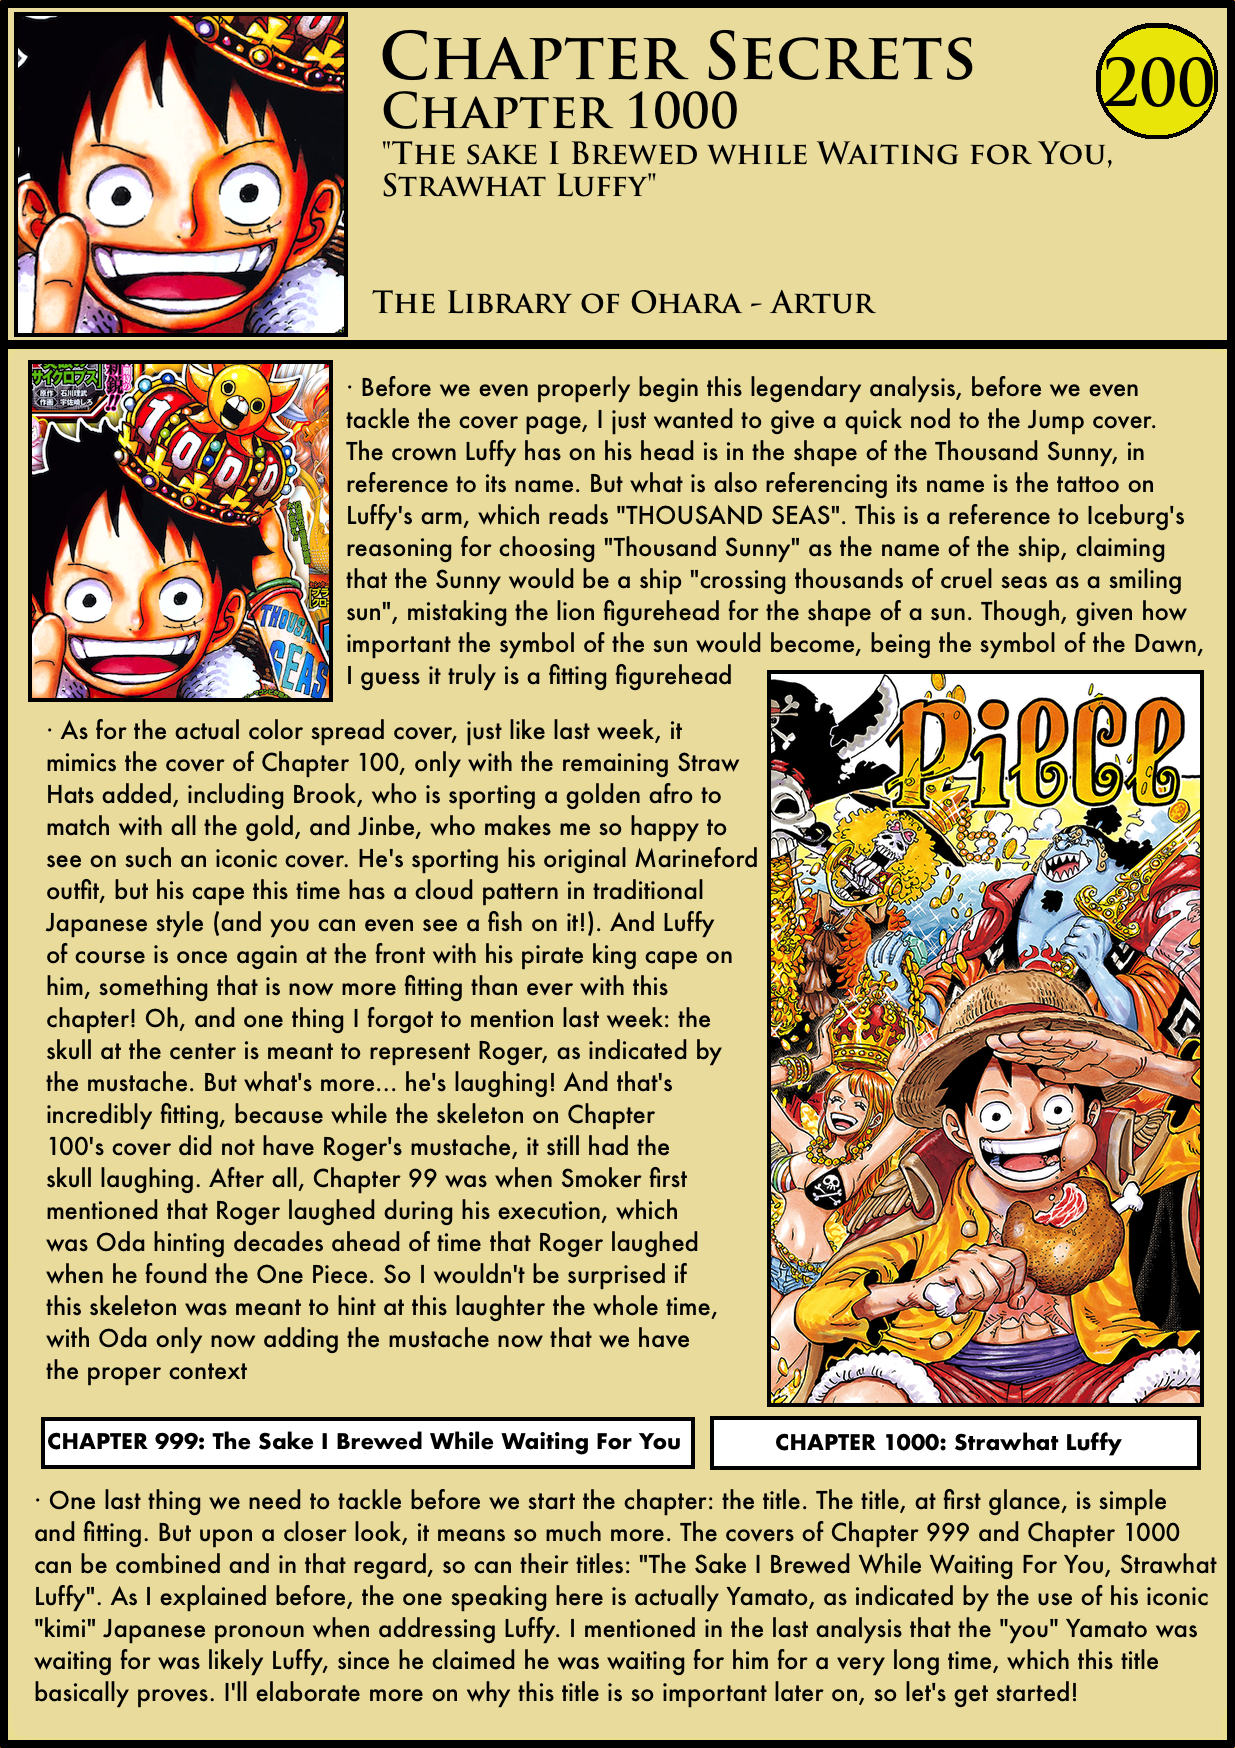 Reddit - OnePiece - I started watching one piece I December 2019 and I have  finally caught up to this wonderful w…